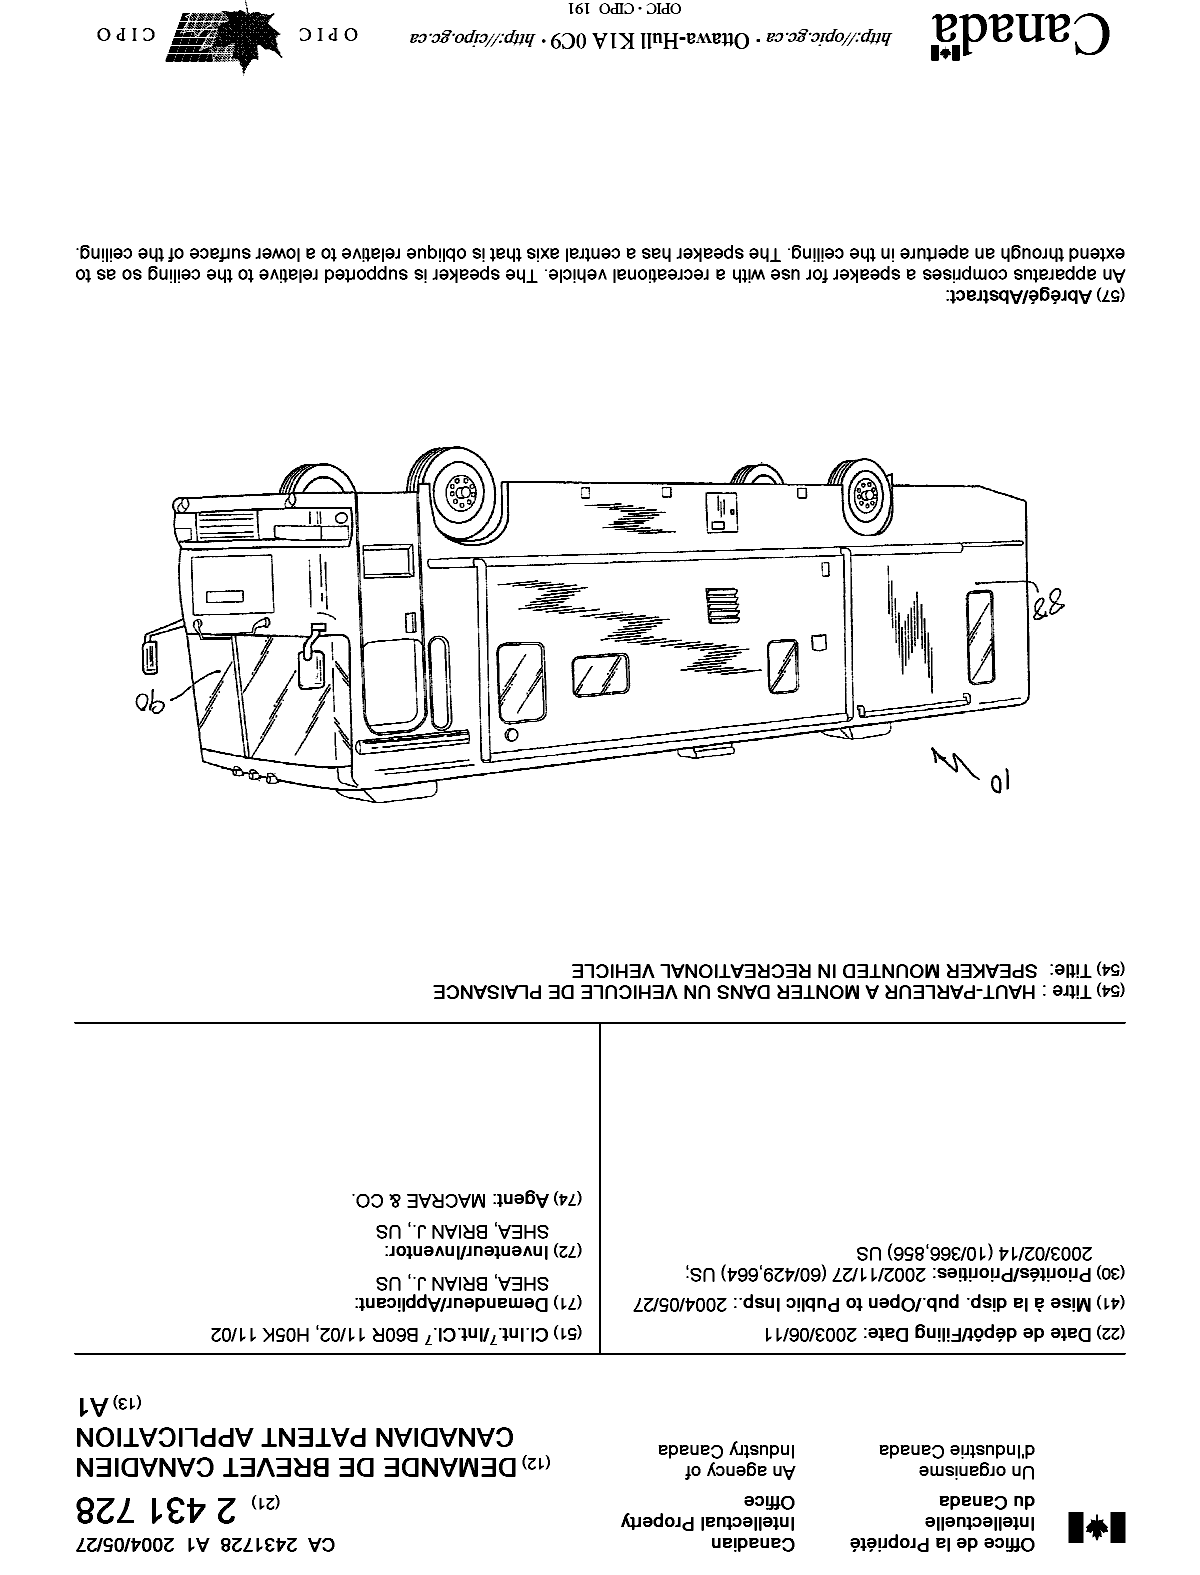 Canadian Patent Document 2431728. Cover Page 20040430. Image 1 of 1